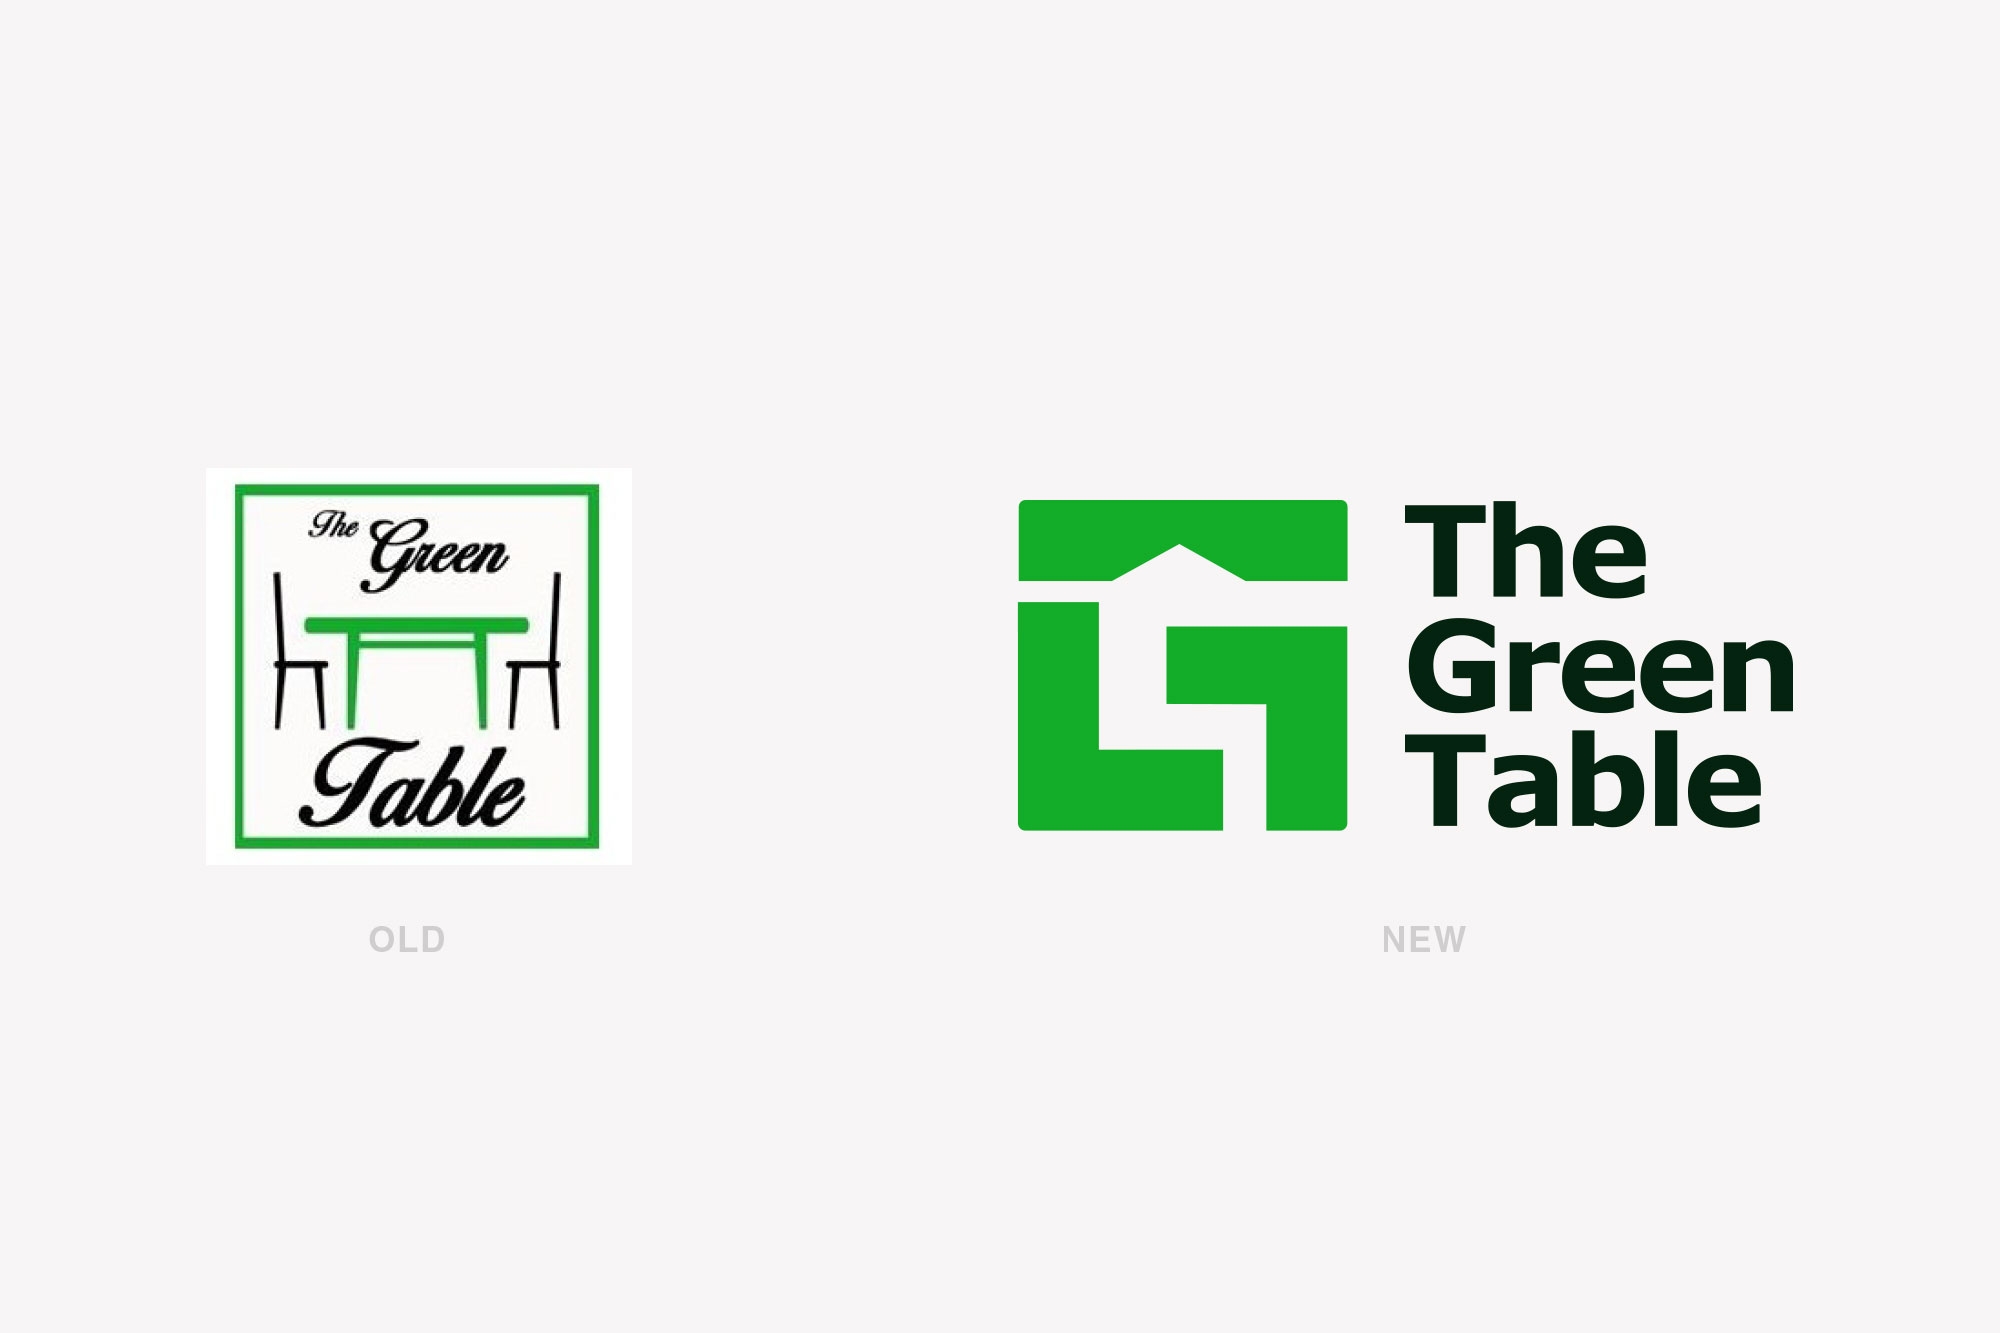 The Green Table Ph - Old and new - Before and after logos - Tribox Design